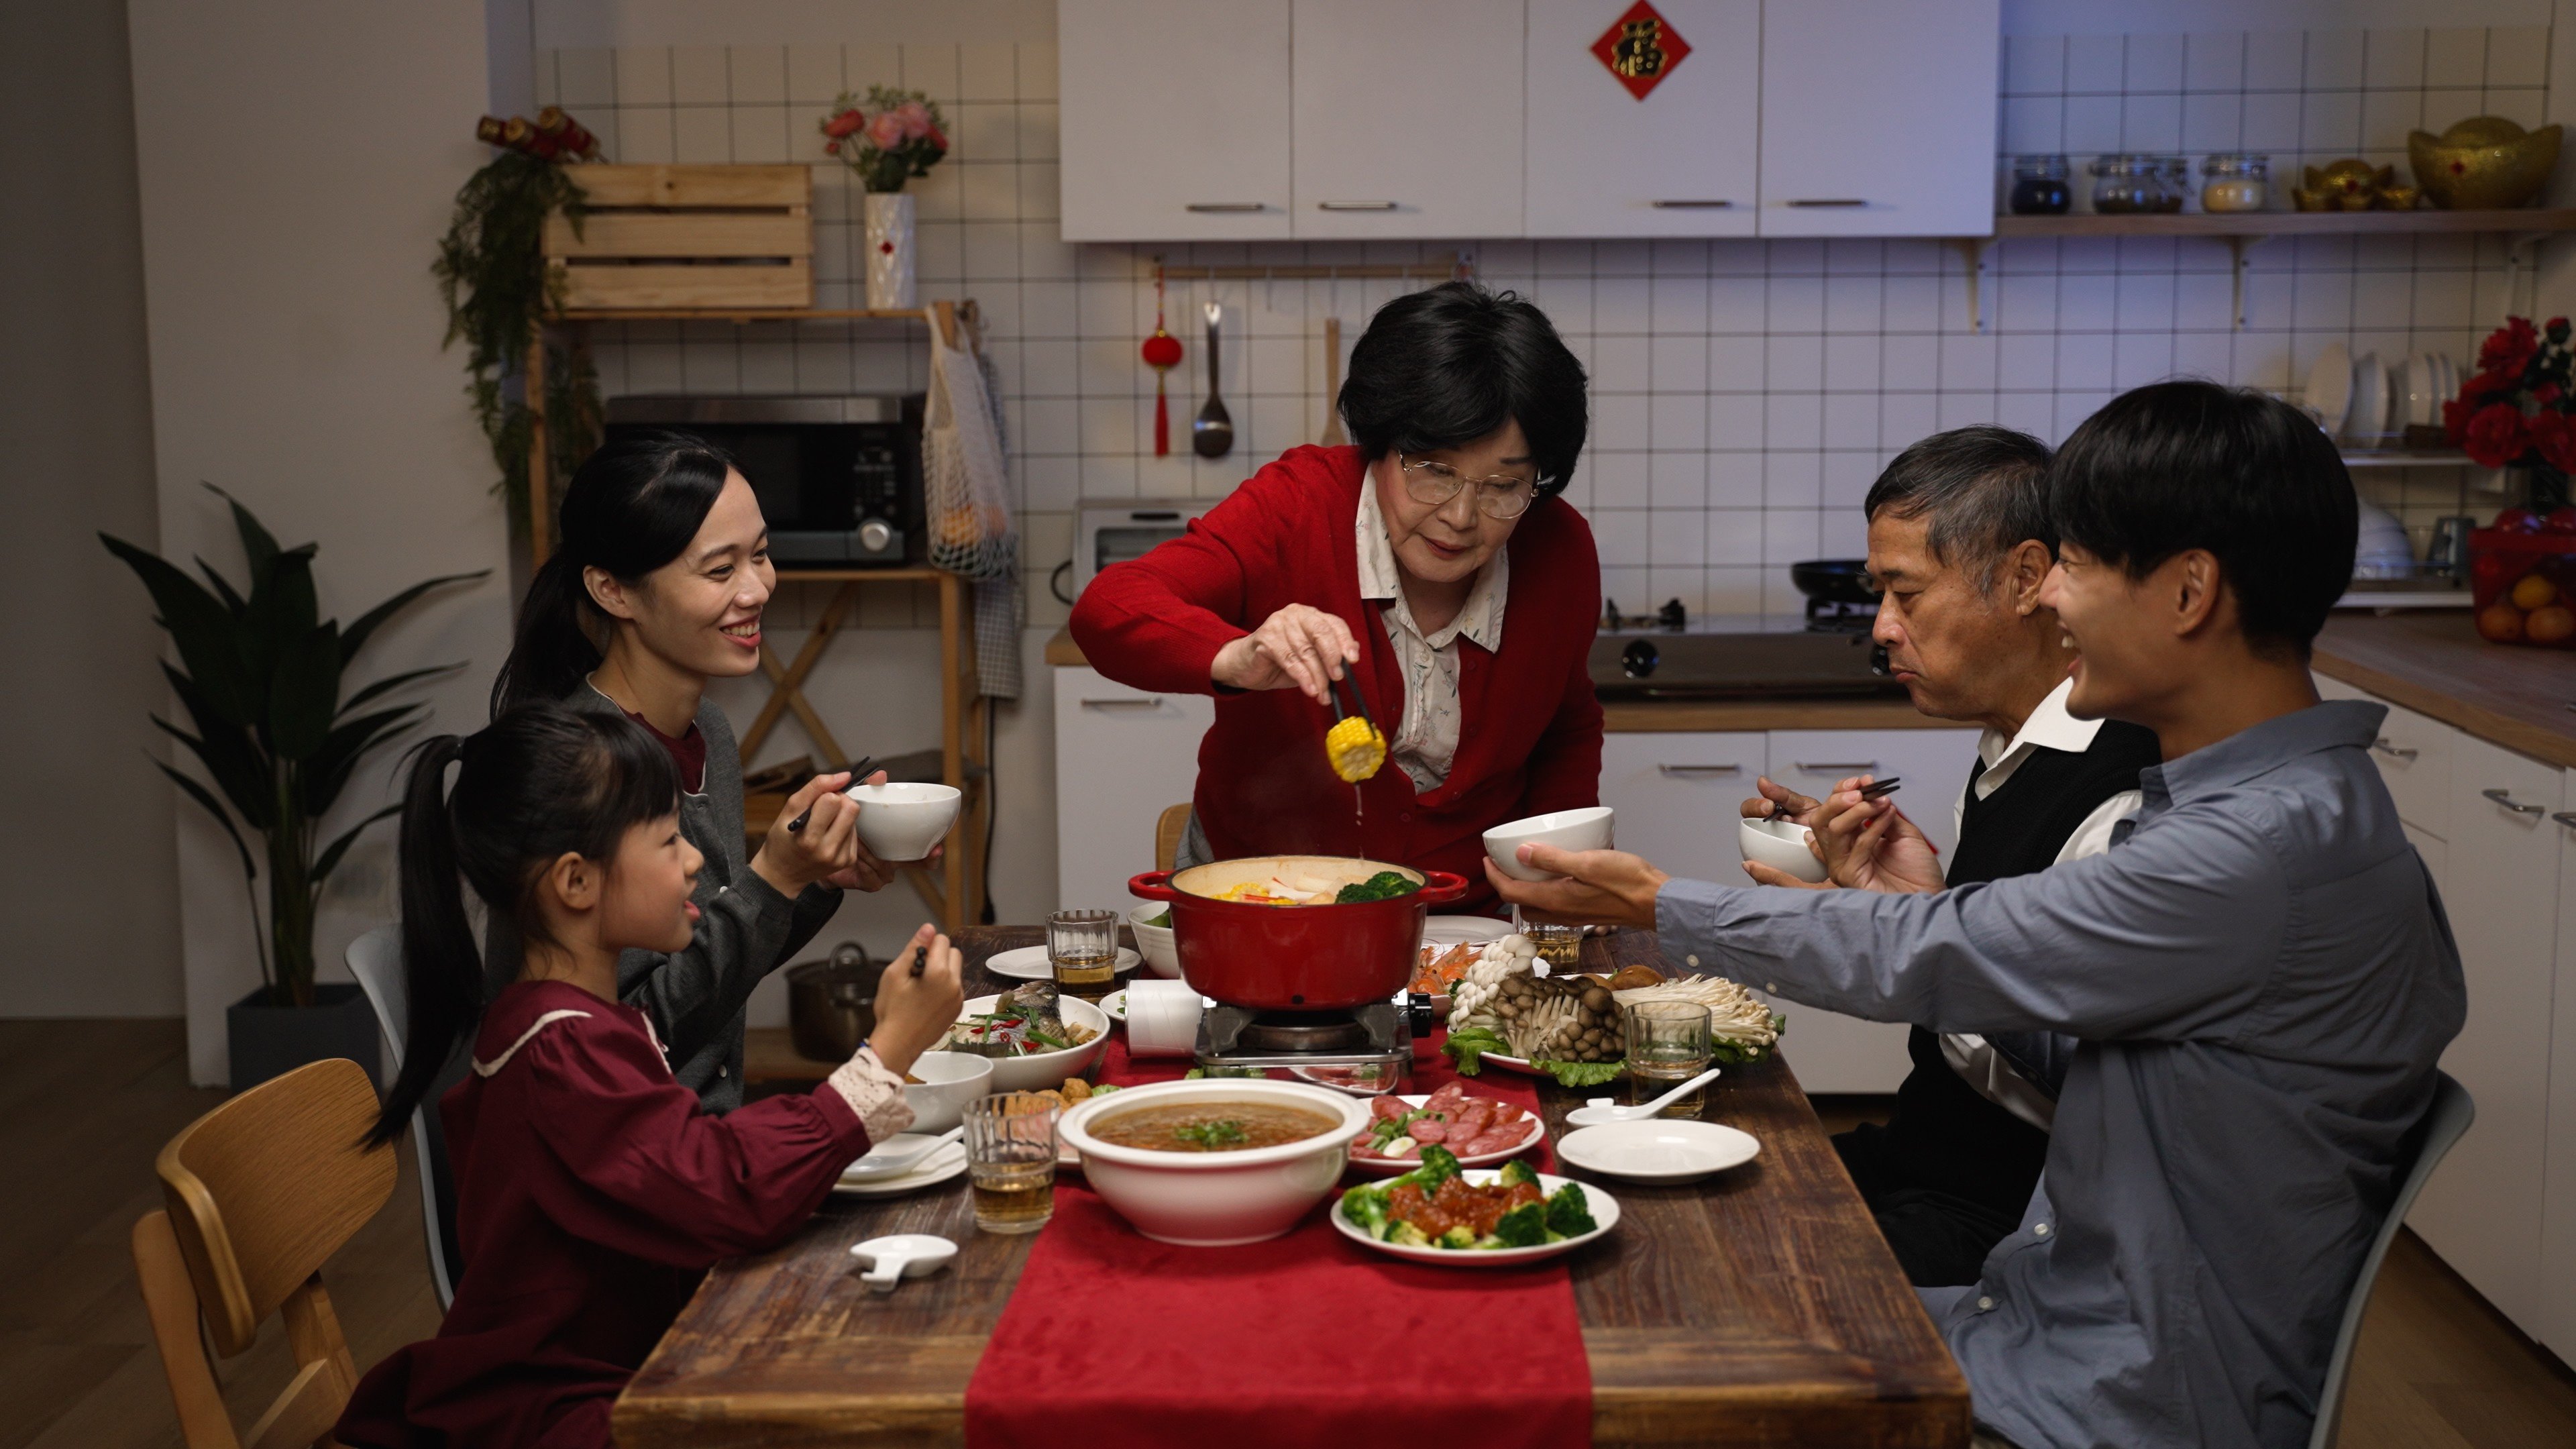 Having family and friends together around the table to share home-cooked food brings joy and mental health benefits to all, according to experts. Photo: Shutterstock